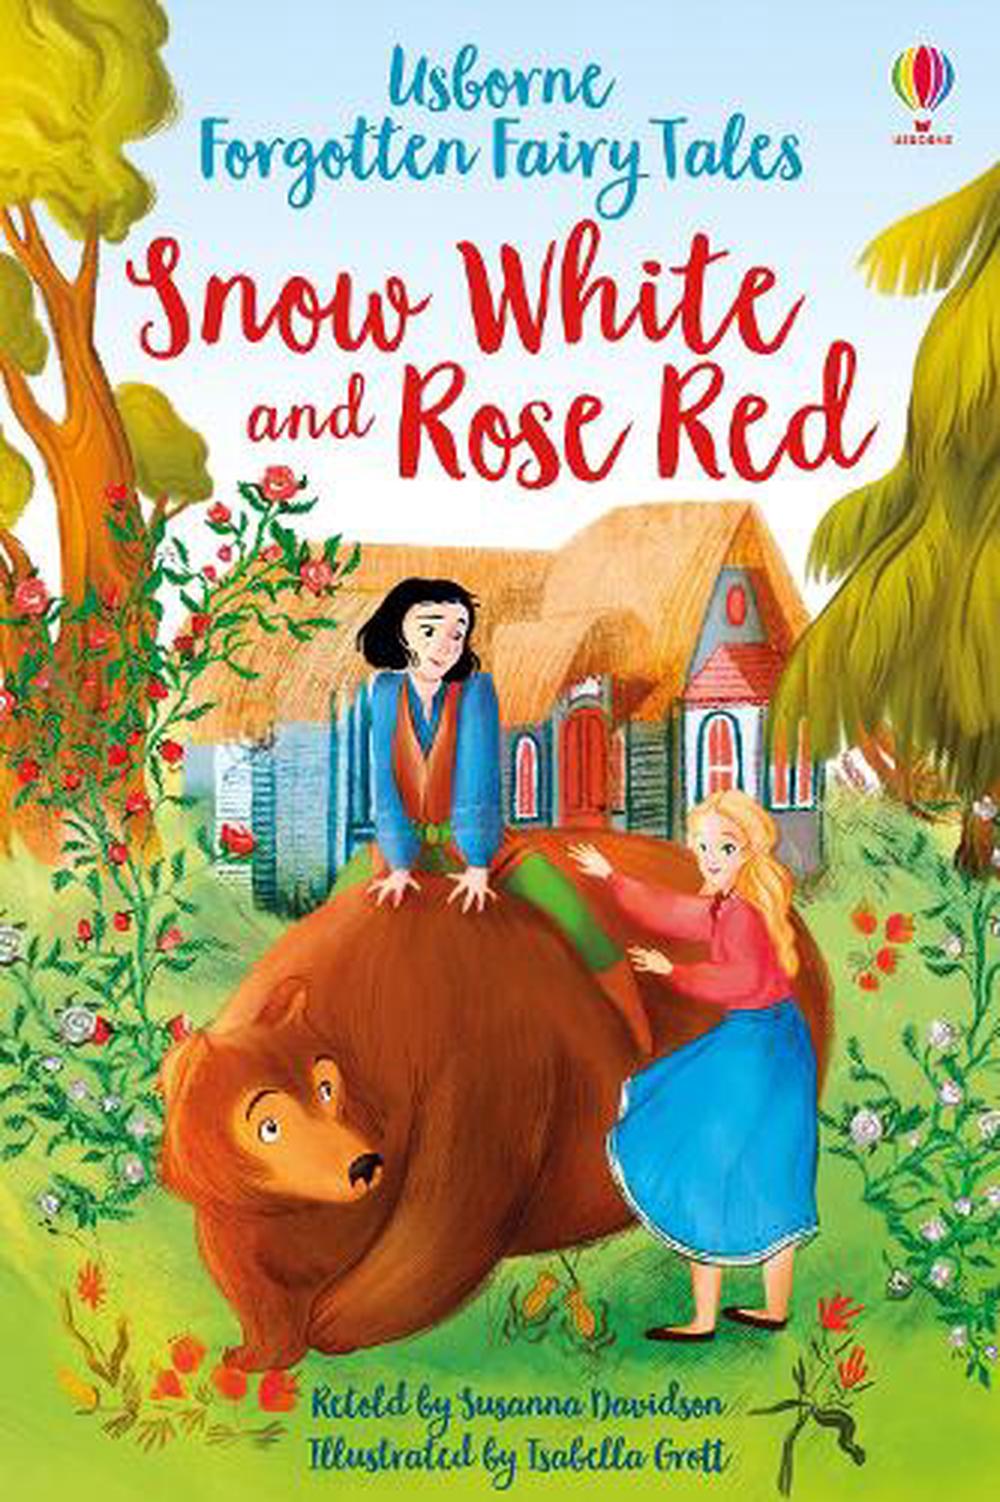 Forgotten Fairy Tales Snow White And Rose Red By Susanna Davidson Hardcover Buy Online At Moby The Great